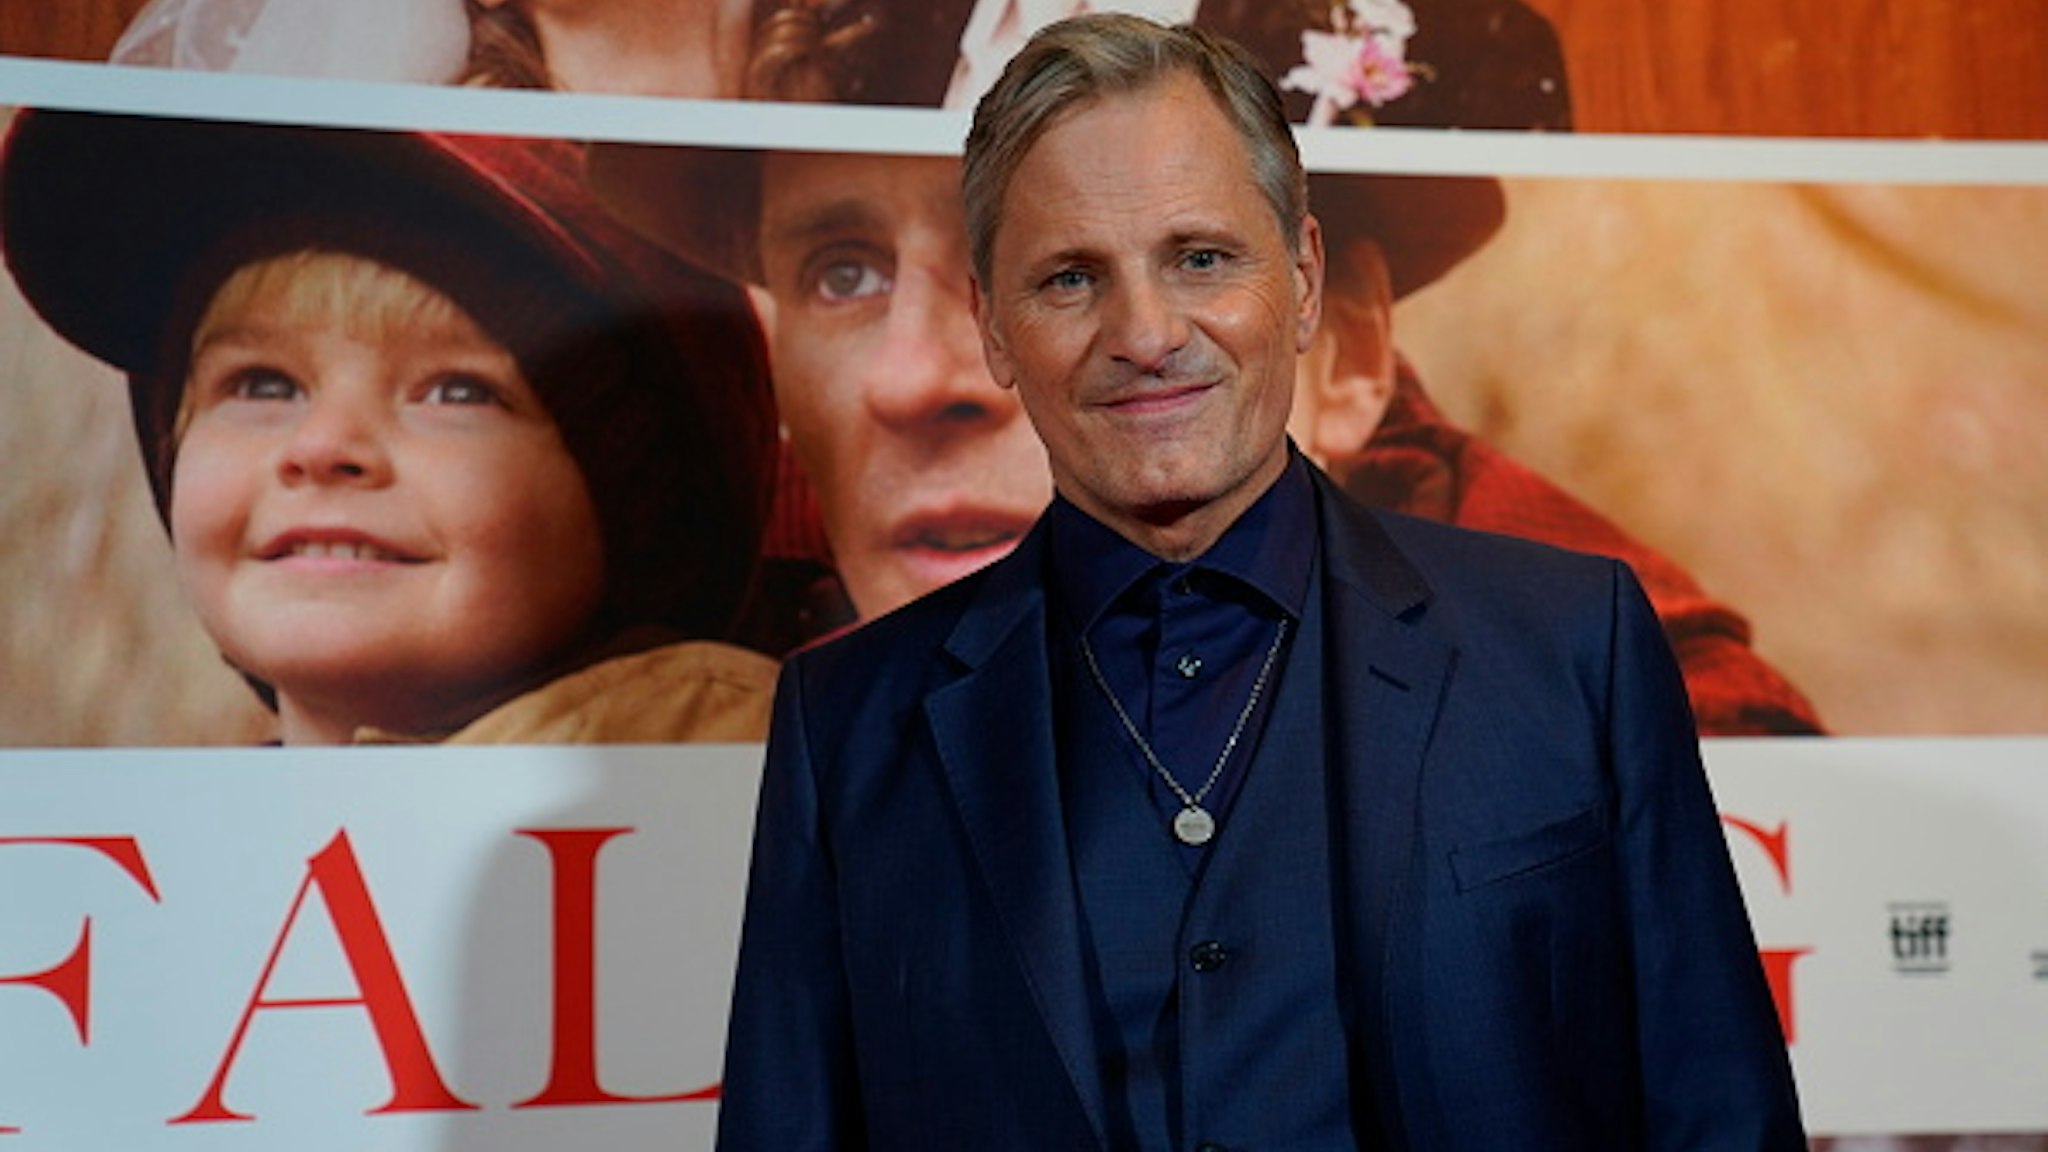 Danish-US actor Viggo Mortensen poses as he arrives the galepremiere of his new movie "Falling" in Copenhagen on October 26, 2020. - "Falling" is Mortensen's debut as director and screenwriter and the film premiers in Danish theatres on November 4, 2020. (